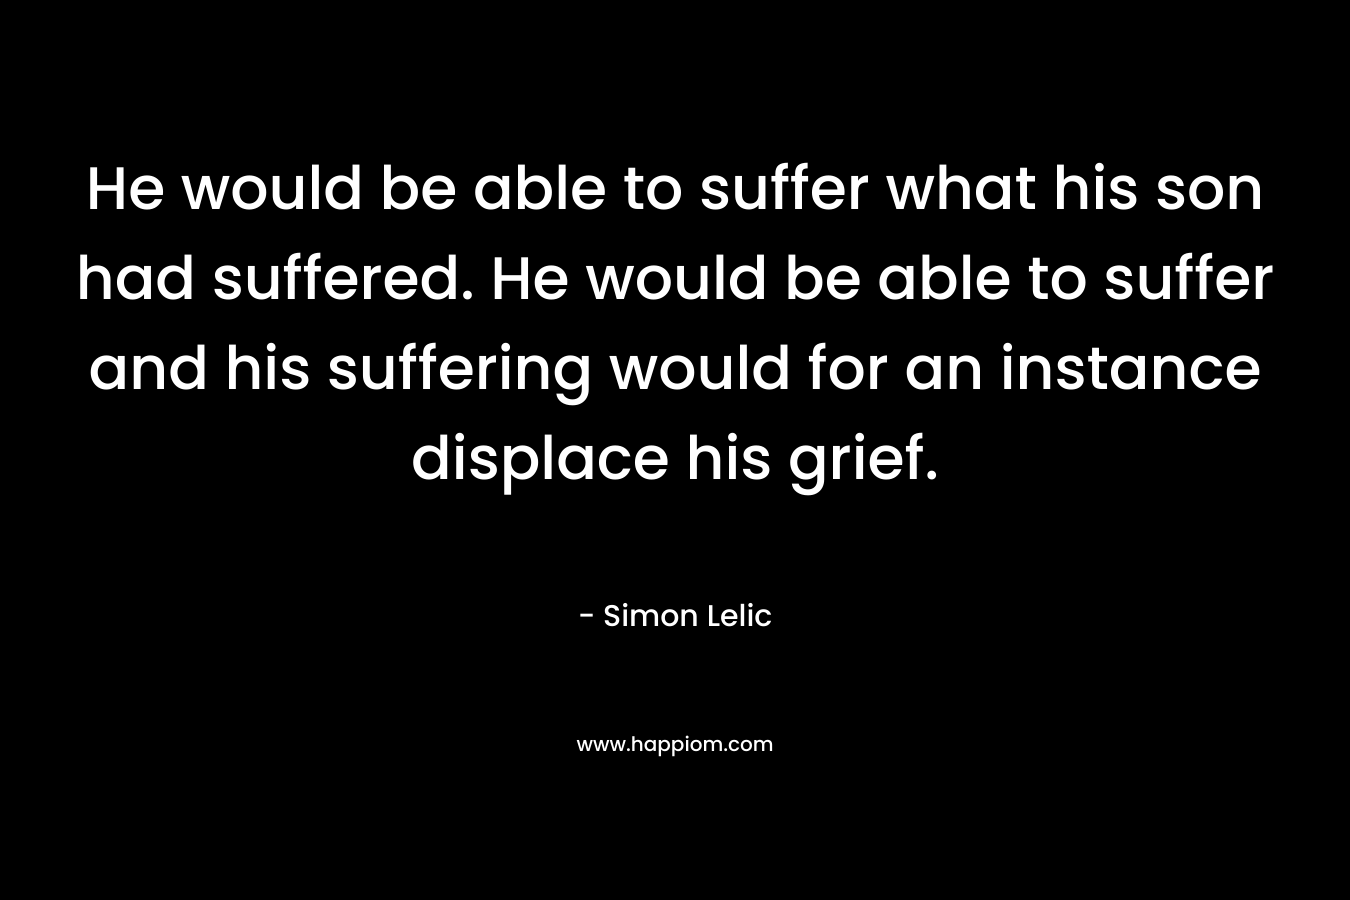 He would be able to suffer what his son had suffered. He would be able to suffer and his suffering would for an instance displace his grief. – Simon Lelic